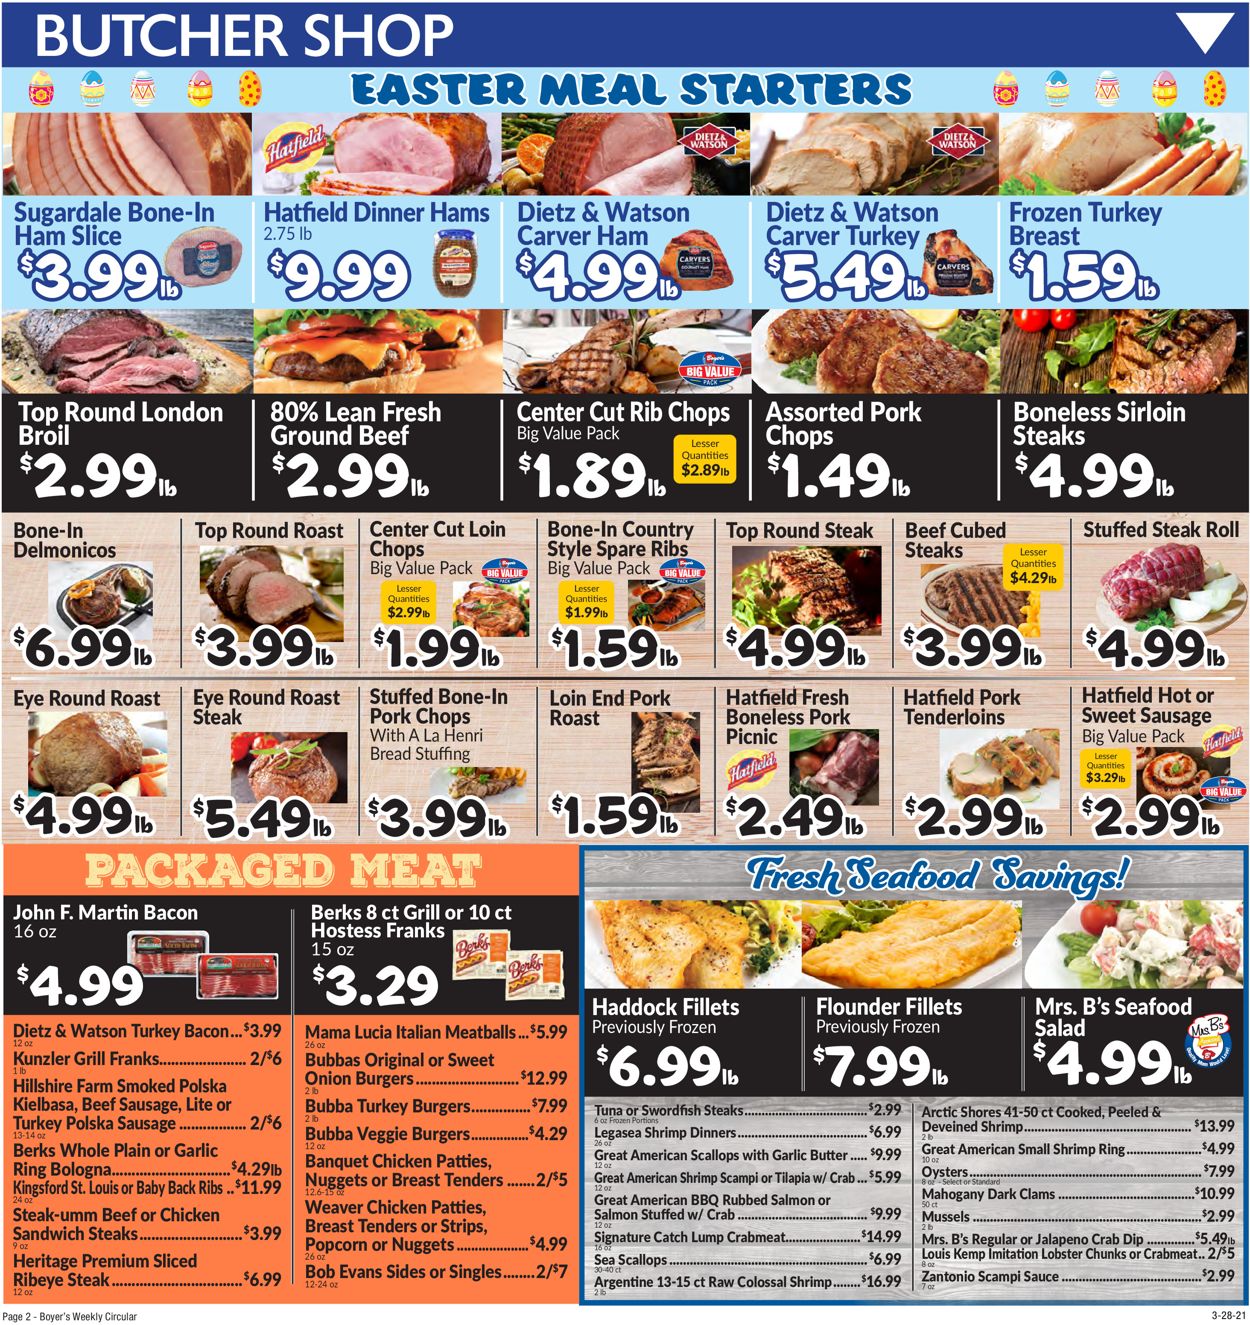 Boyer's Food Markets - Easter 2021 ad Weekly Ad Circular - valid 03/28-04/03/2021 (Page 4)